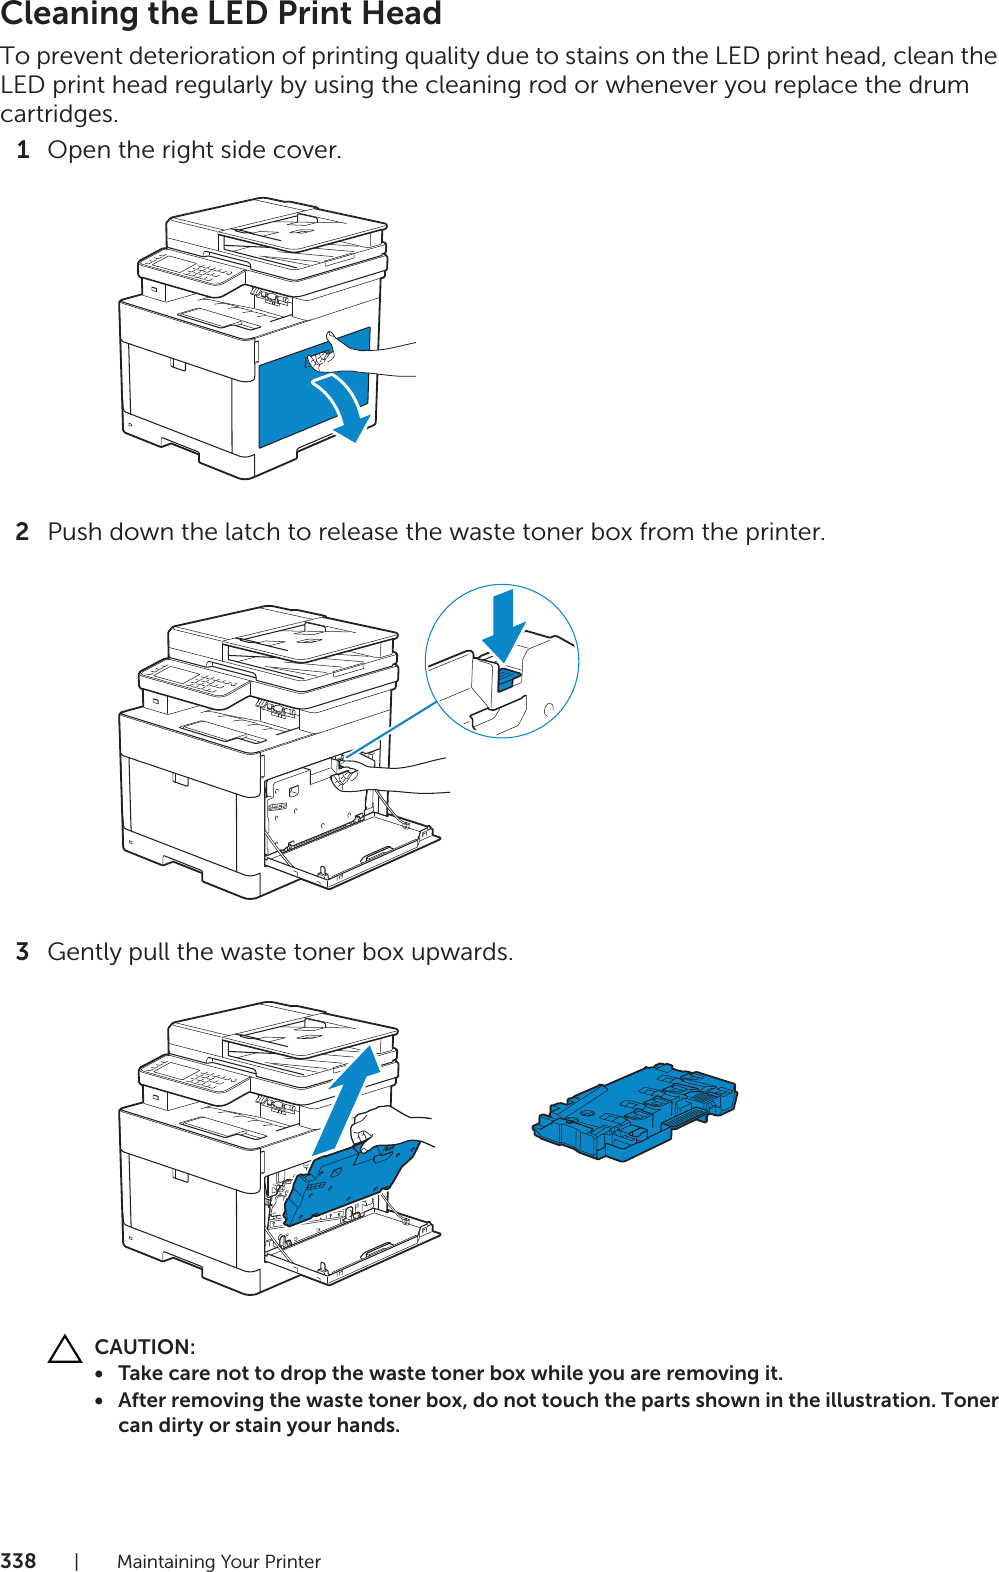 338| Maintaining Your PrinterCleaning the LED Print HeadTo prevent deterioration of printing quality due to stains on the LED print head, clean the LED print head regularly by using the cleaning rod or whenever you replace the drum cartridges.1Open the right side cover.2Push down the latch to release the waste toner box from the printer.3Gently pull the waste toner box upwards.CAUTION:• Take care not to drop the waste toner box while you are removing it.• After removing the waste toner box, do not touch the parts shown in the illustration. Toner can dirty or stain your hands.